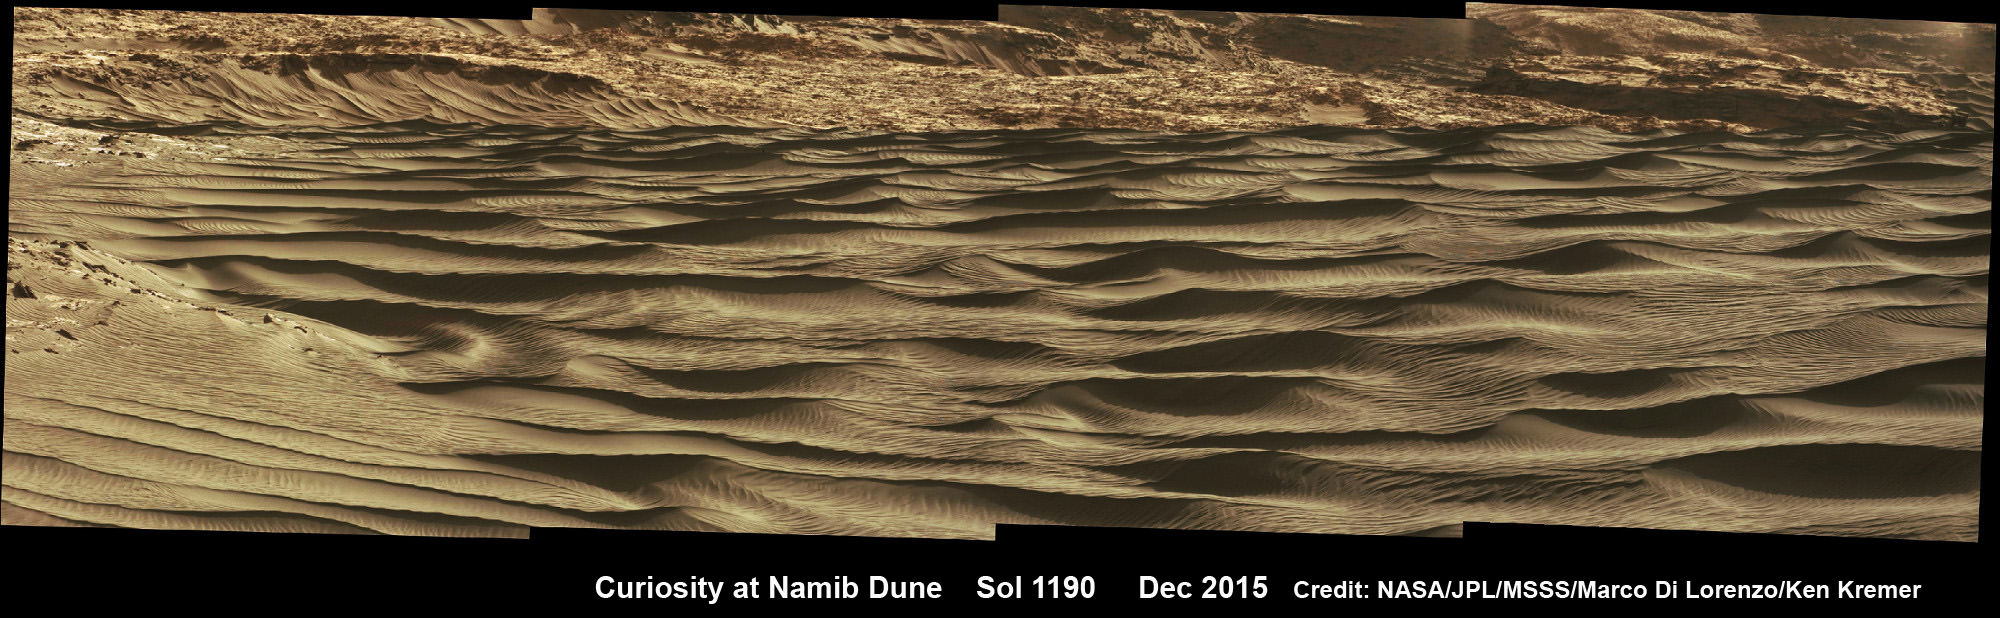 Curiosity observes dark dunes up close after arriving in the vicinity of Namib Dune at base of Mount Sharp to study sand movements over time.  This photo mosaic is stitched from Mastcam camera raw images taken on Sol 1190, Dec. 11, 2015.  Credit: NASA/JPL/MSSS/Marco Di Lorenzo/Ken Kremer/kenkremer.com